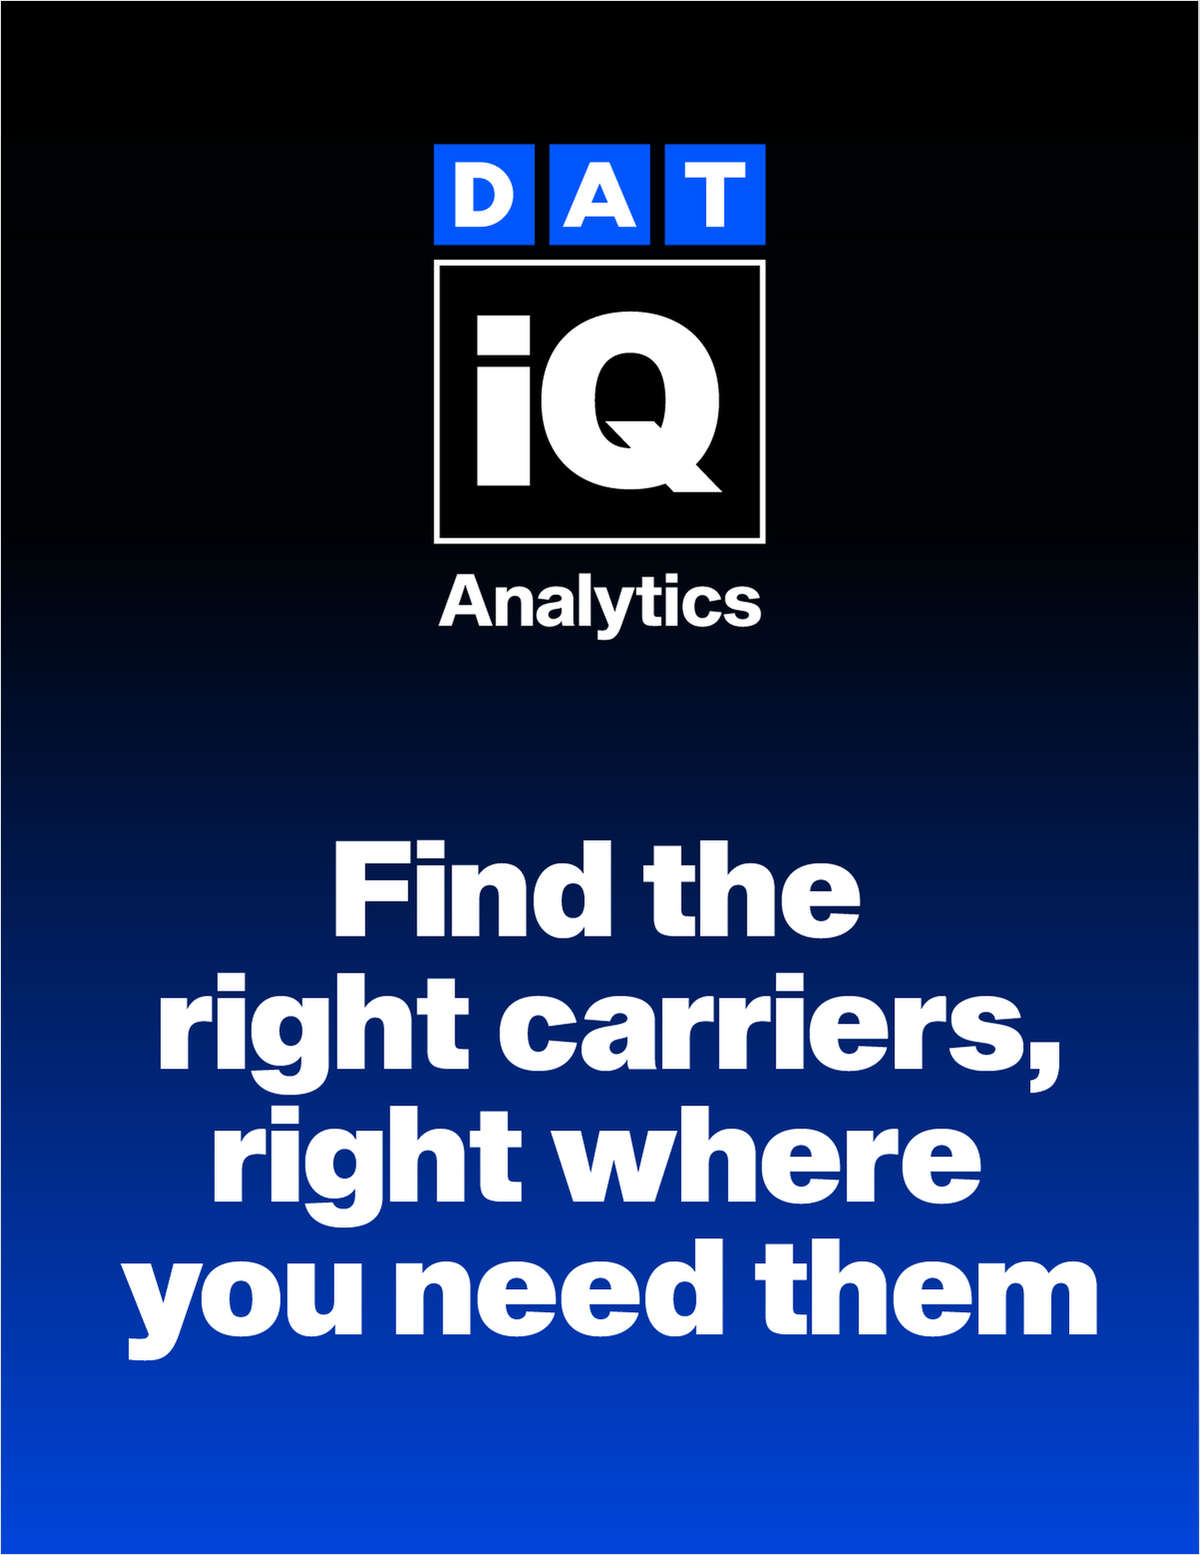 Quickly Assess Your Carrier Network and Find Cost Savings with Alternative Carriers Using Carrier Select from Dat iQ